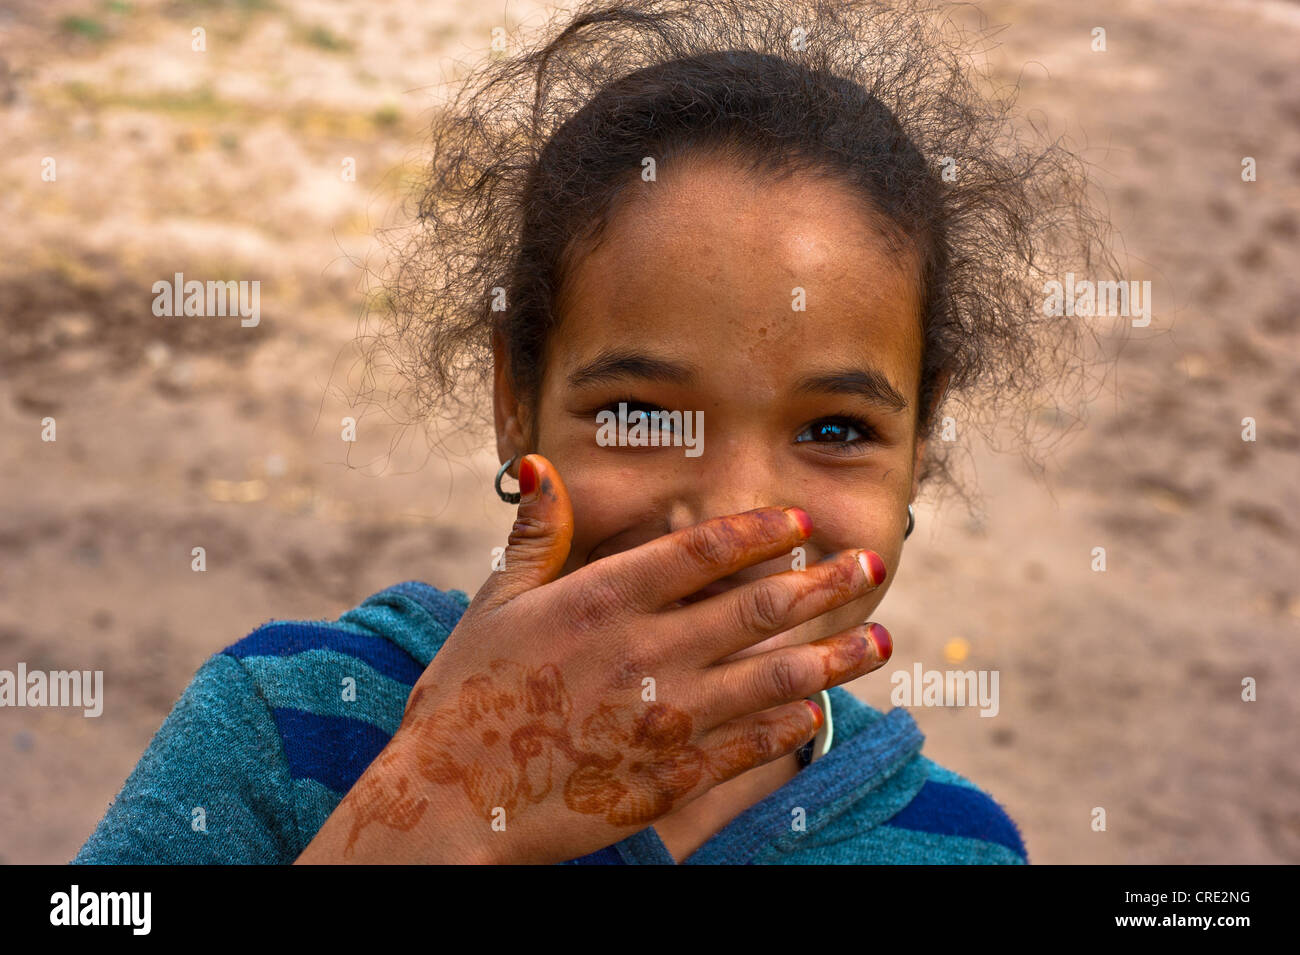 Portrait, smiling girl holding her hand decorated with henna patterns in front of her mouth, Skoura, Morocco, Africa Stock Photo